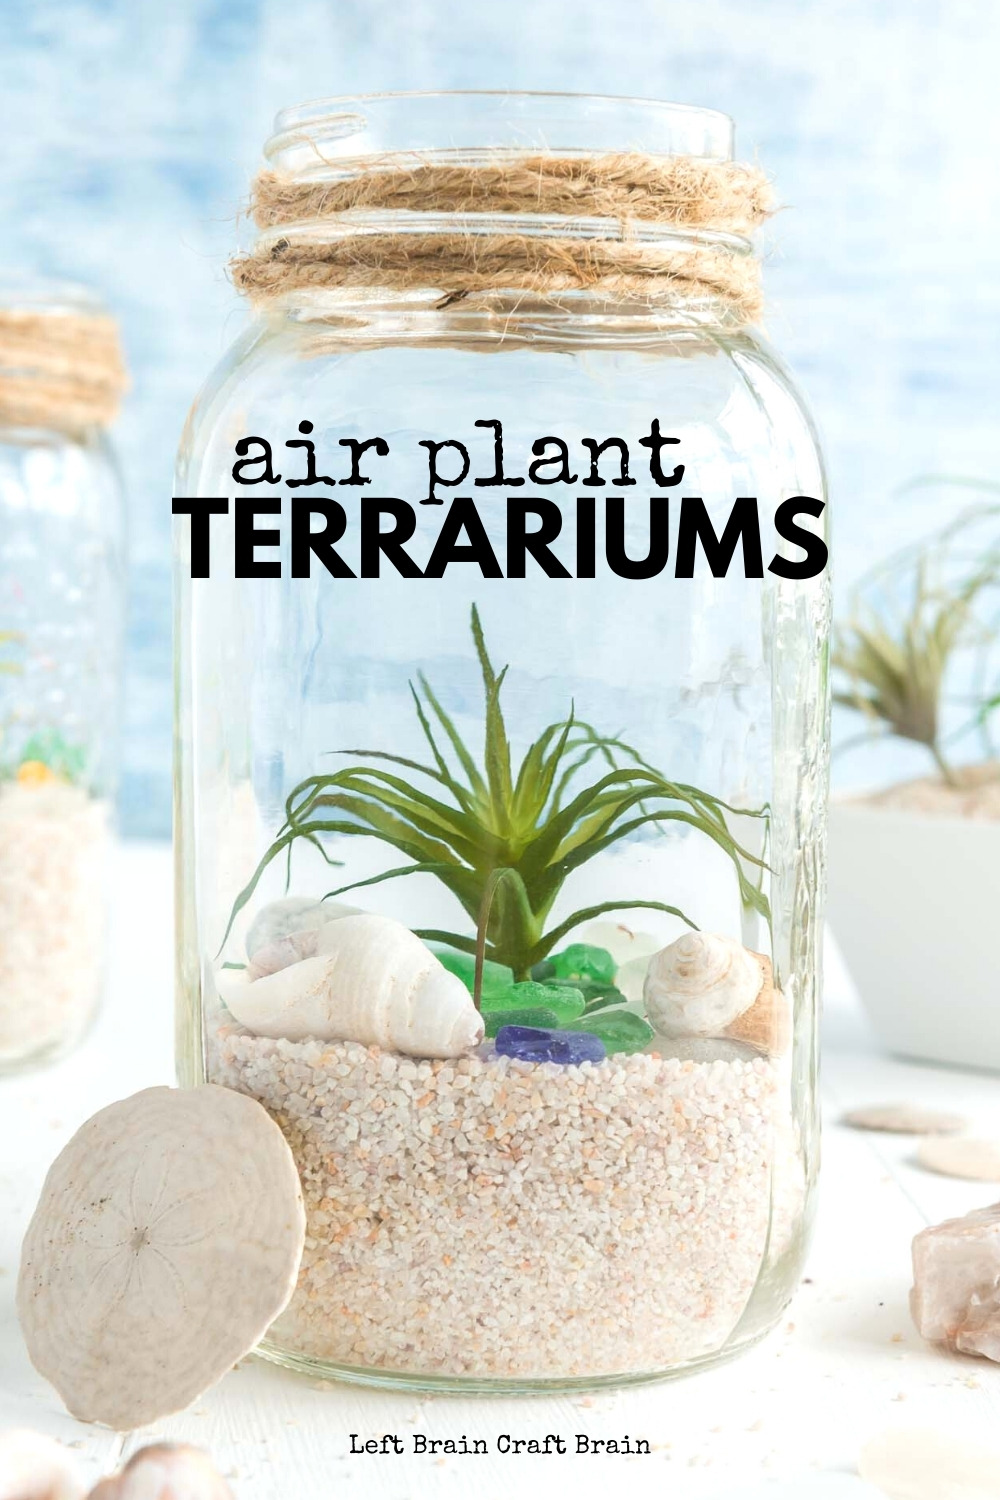 Air Plant Terrariums are fun projects for kids and adults. They're beautiful ways to decorate your home and learn about nature. They make great gifts too.